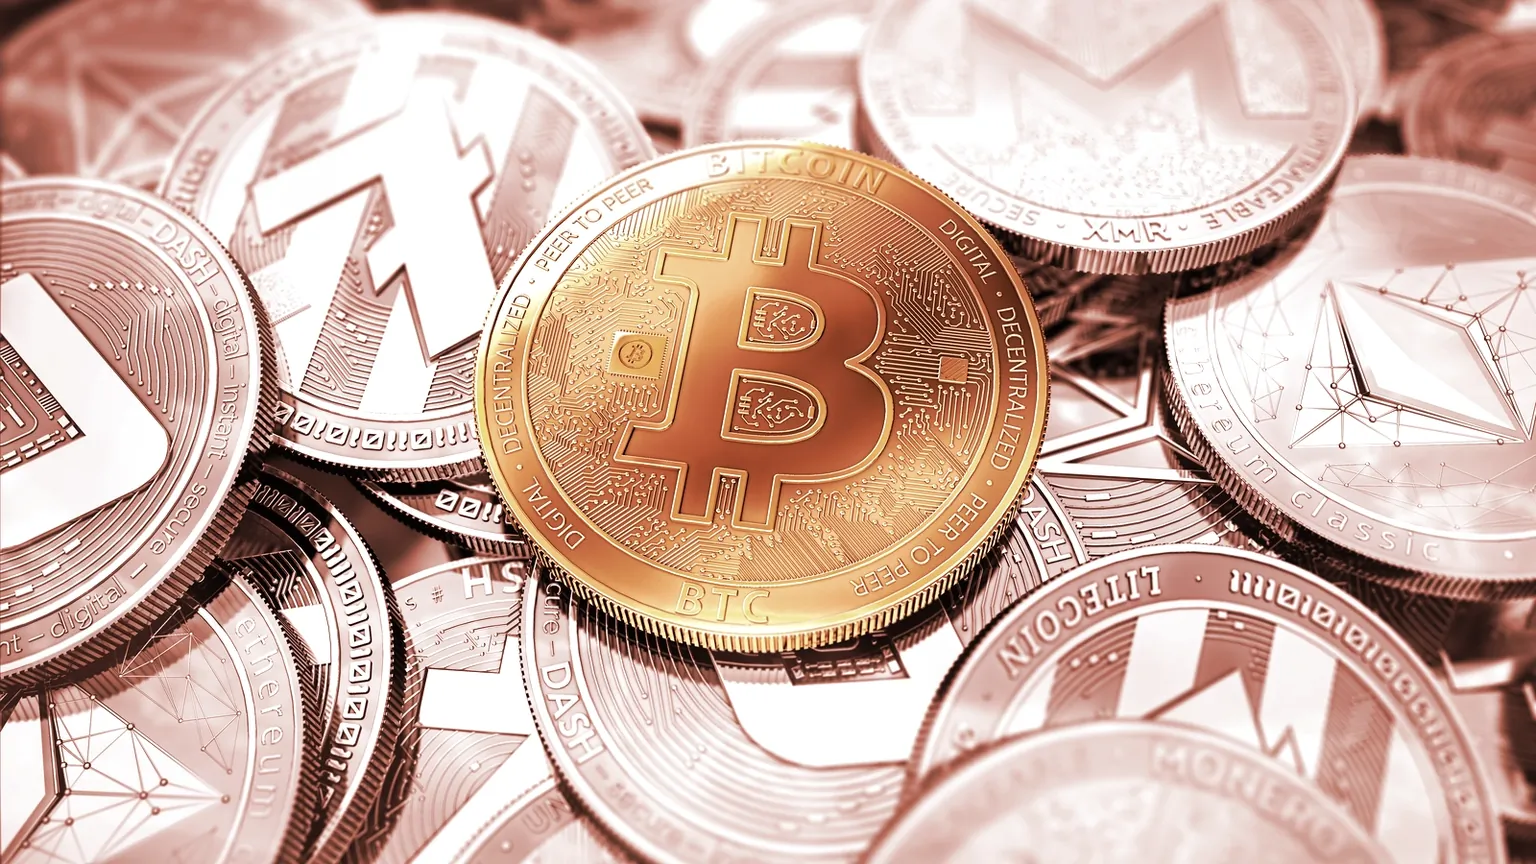 Bitcoin and some altcoins. Image: Shutterstock